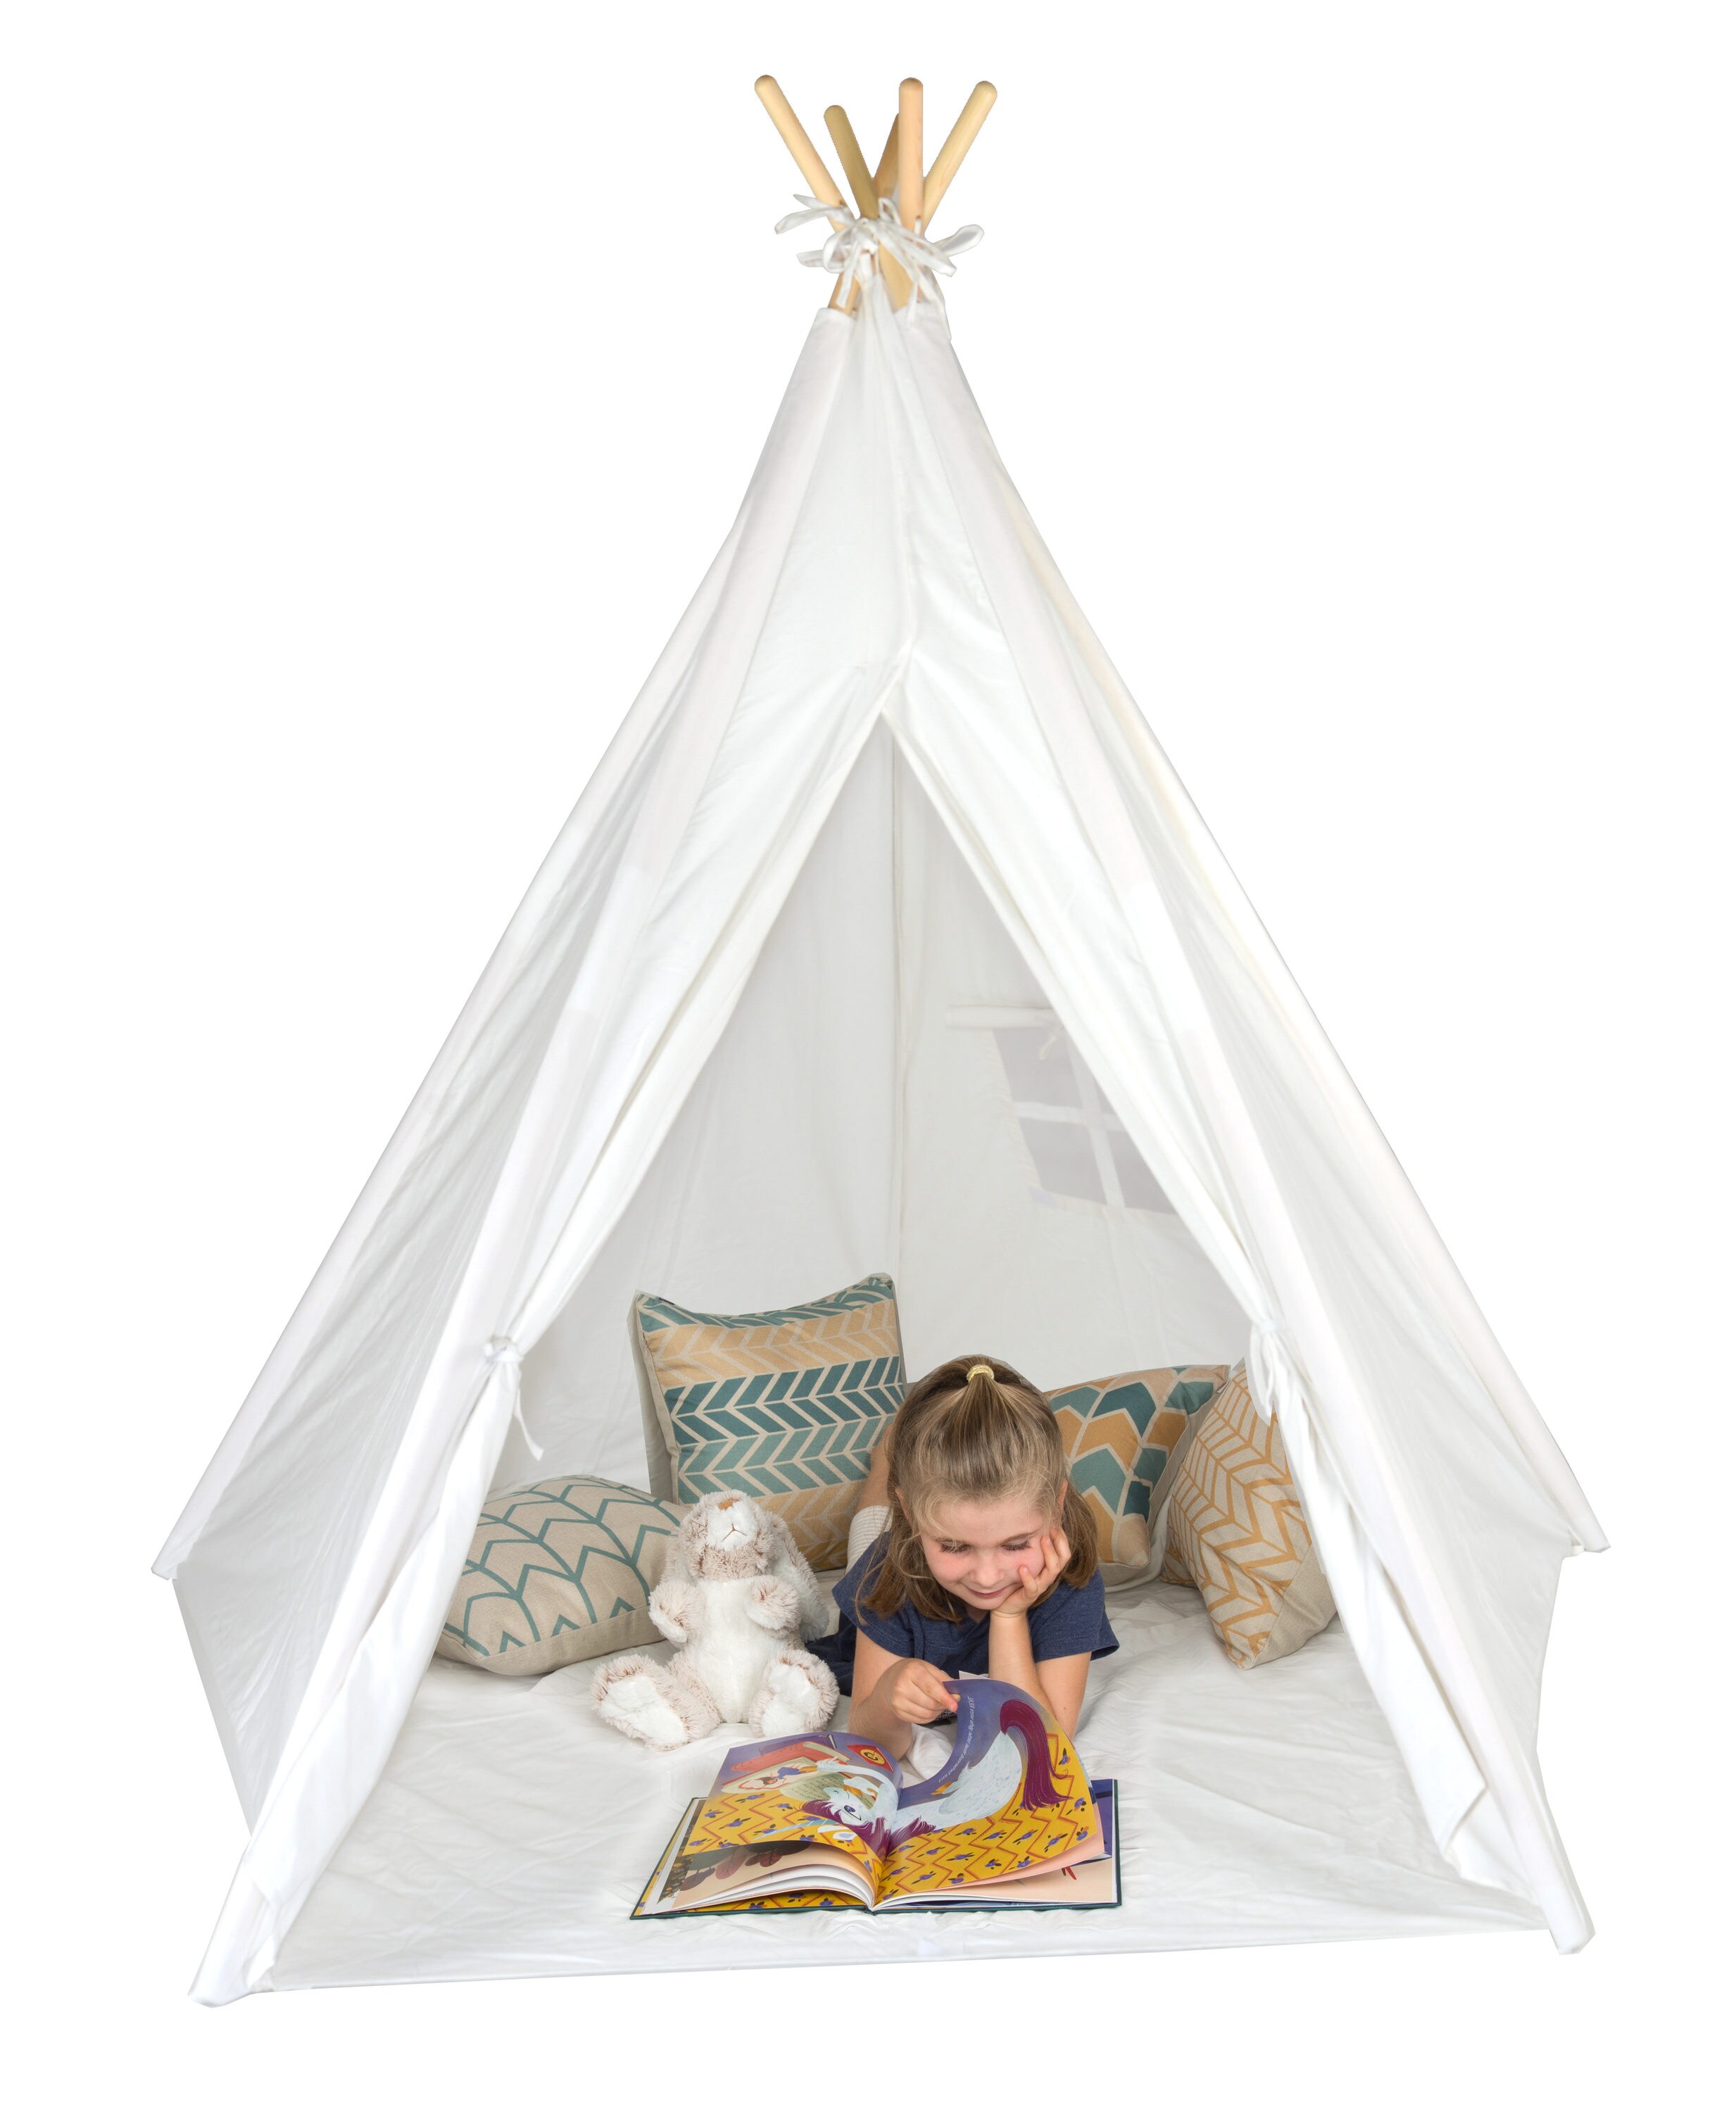 Trademark Innovations 6-ft Giant Tepee Play House of Pine Wood with Carry Case (White) - Durable Cotton Canvas - 4 ft. x 4 ft. x 6 ft. - CPSIA -  TEEPEE